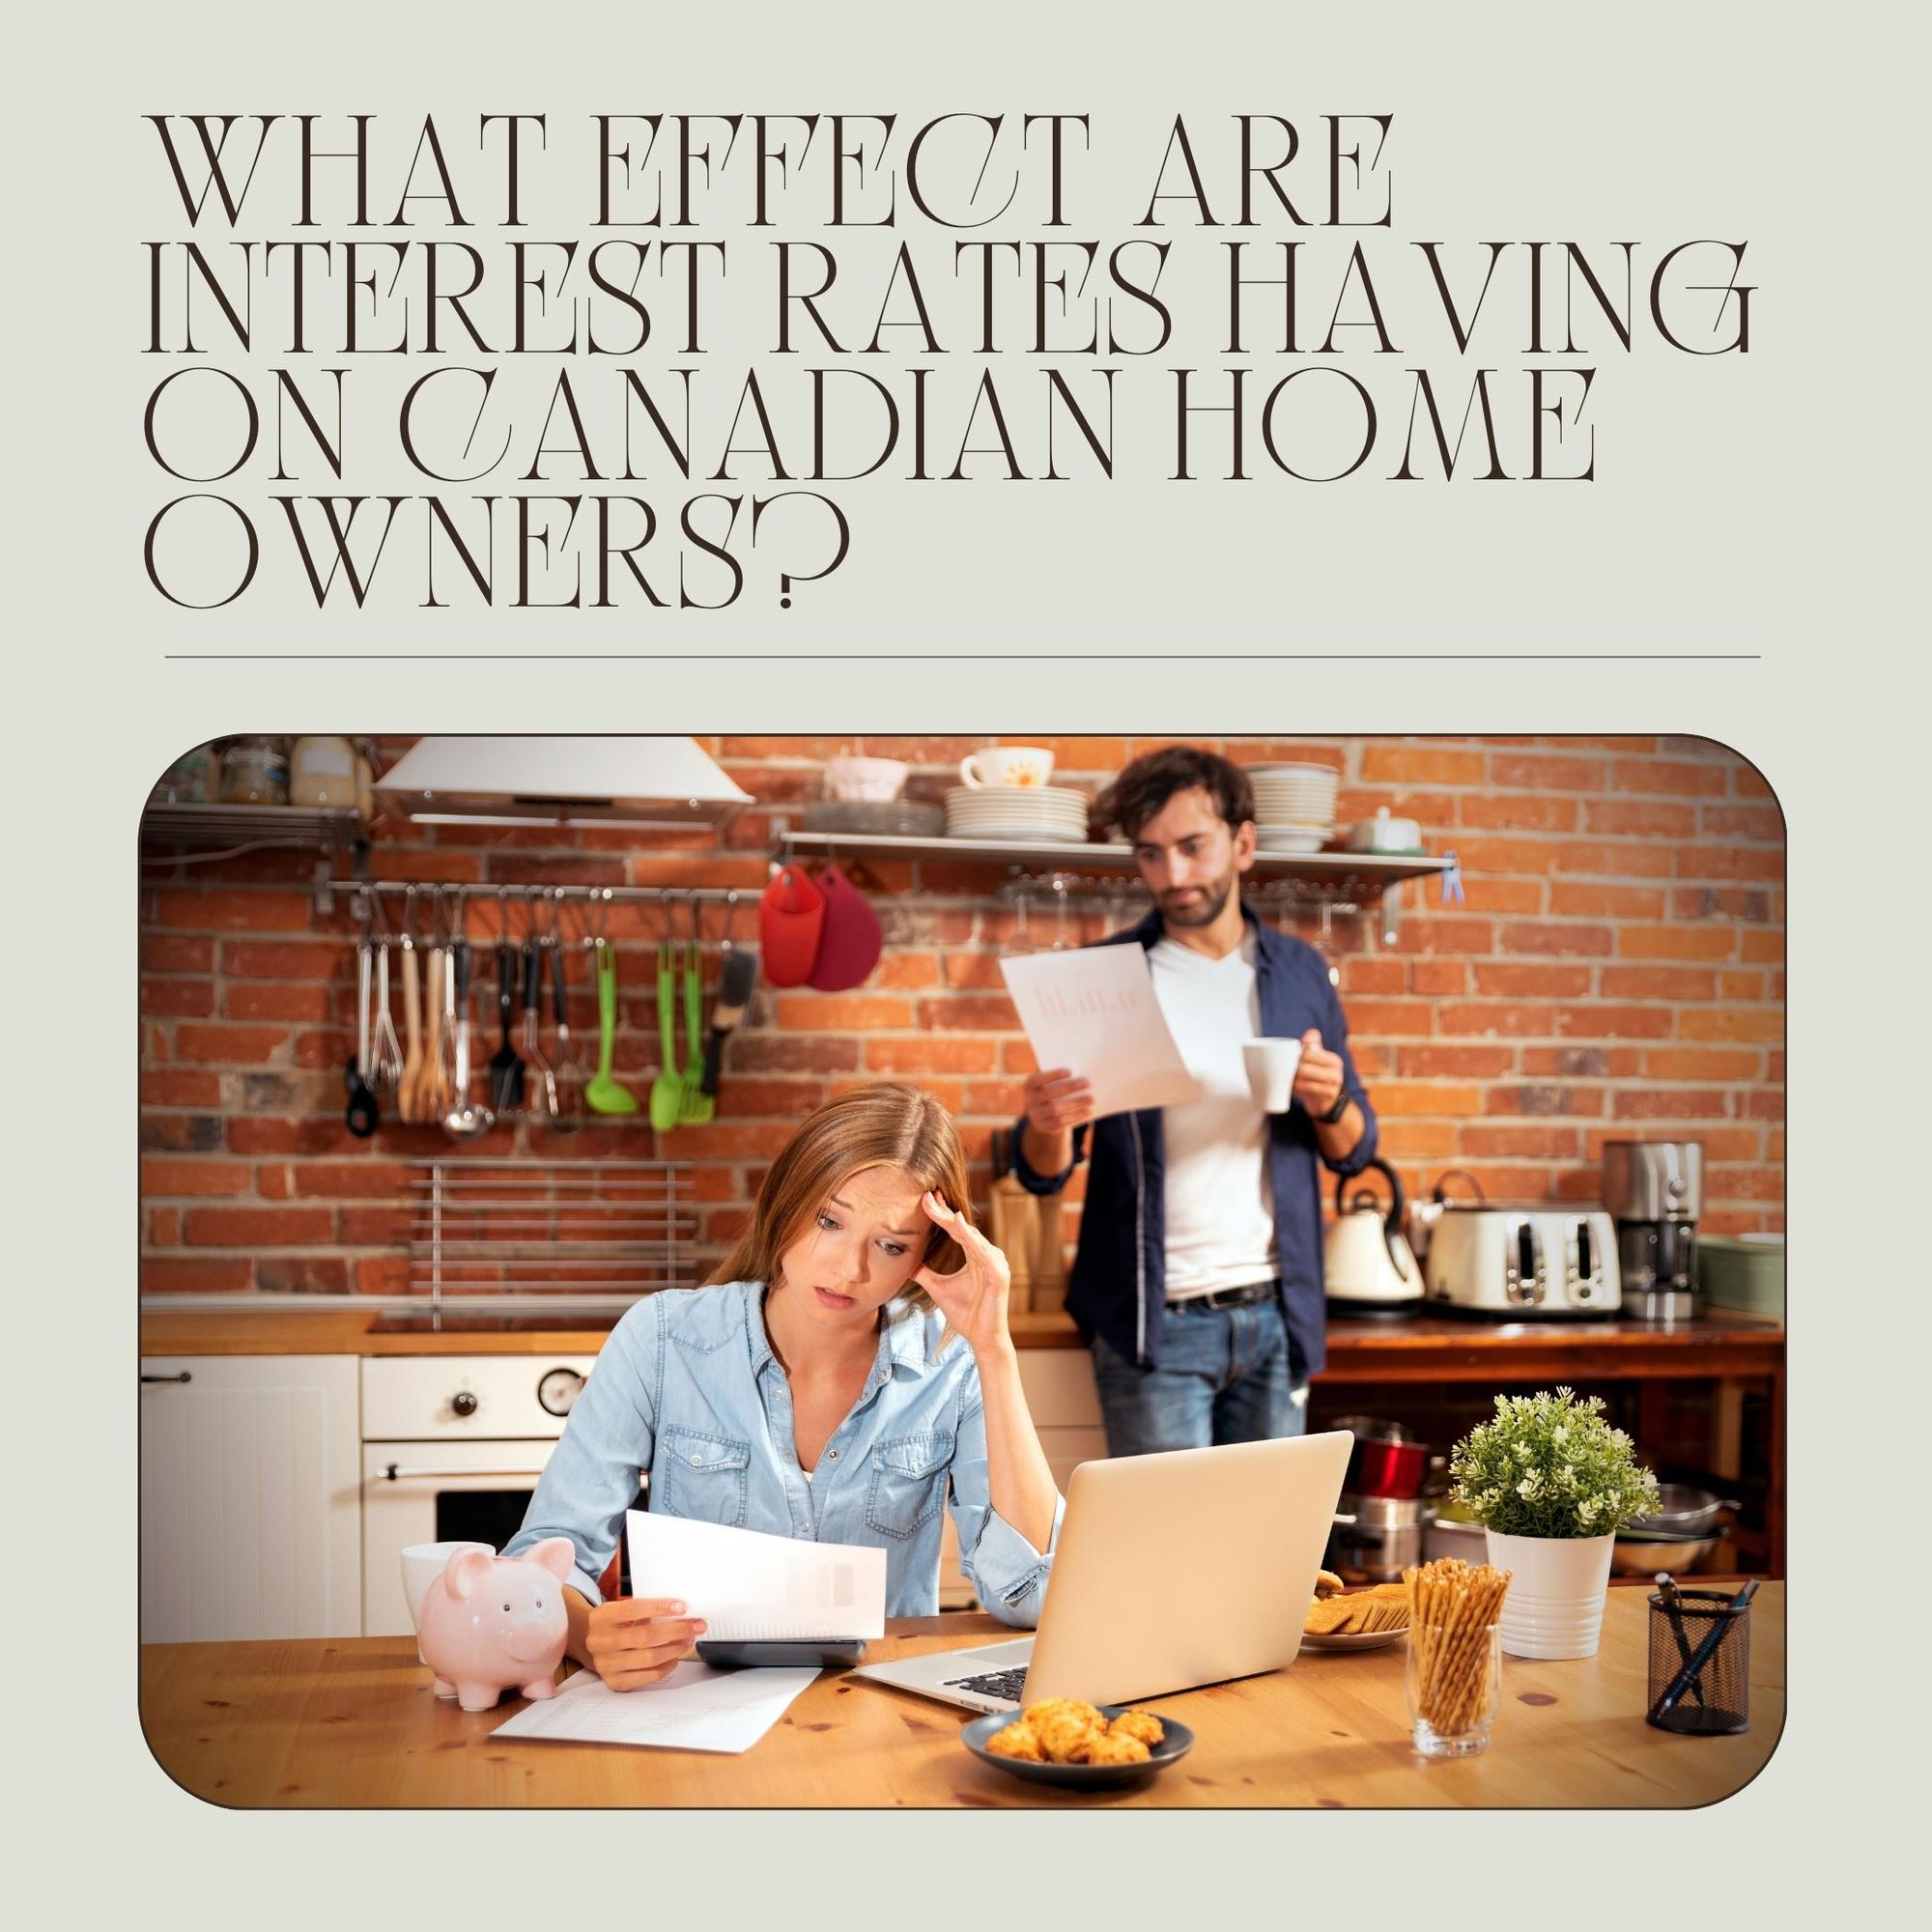 What effect are interest rates having on Canadian home owners?